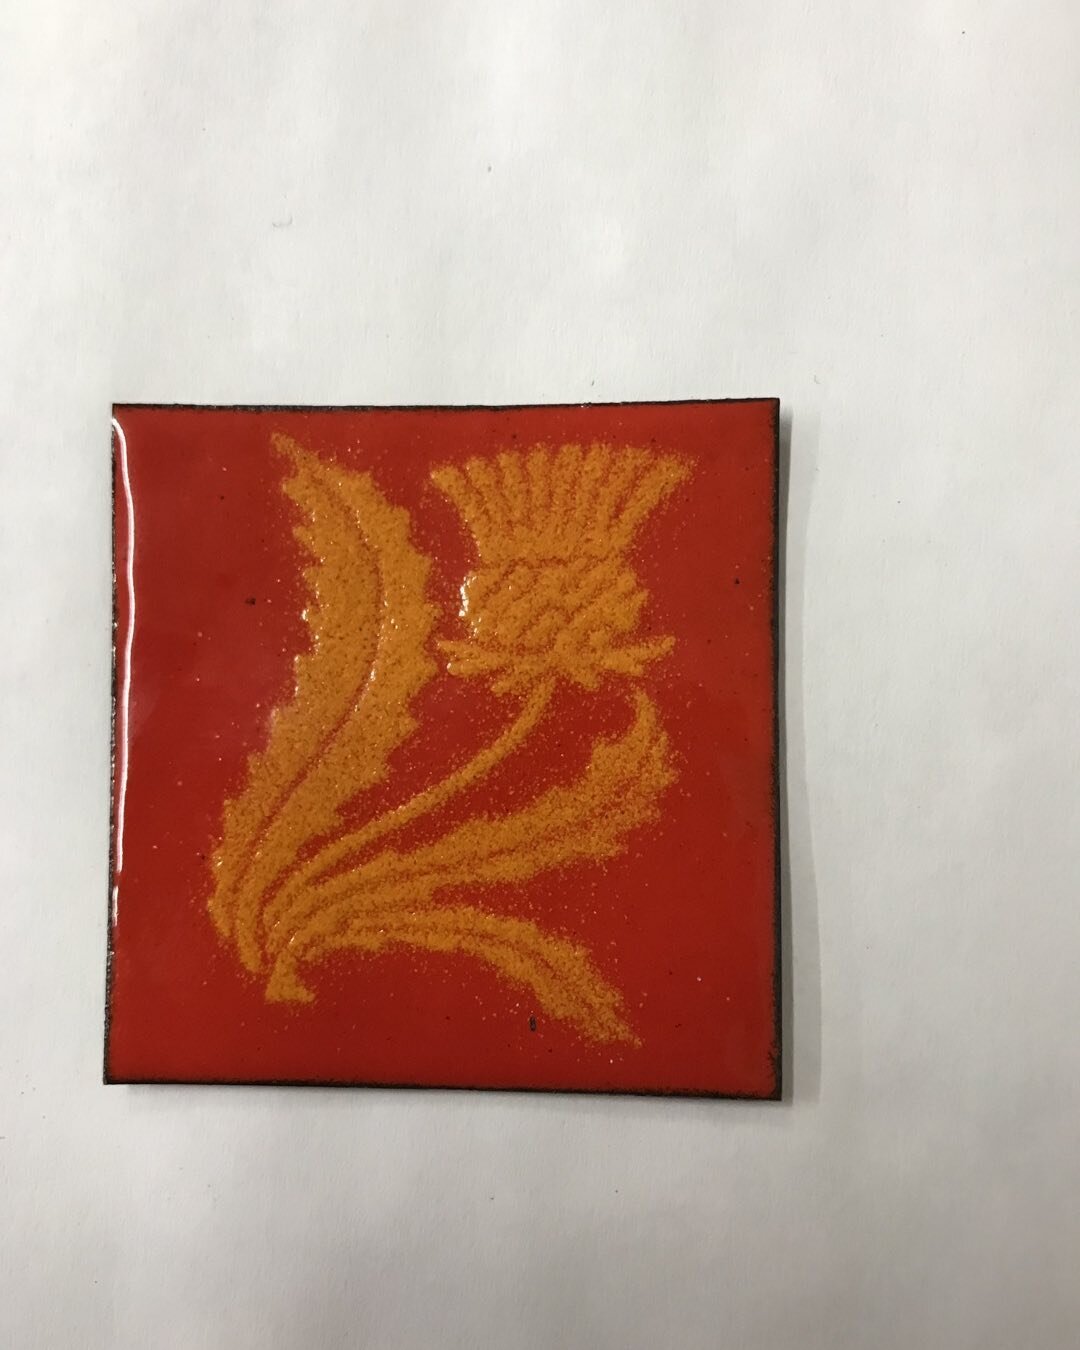 Now on to enameling! Week long class began today at John C Campbell Folk School.  This is my first little piece.  I love the flame orange red background.  The thistle was &ldquo;orange peel&rdquo; firing&hellip;a bit cooler and shorter so it is a bit